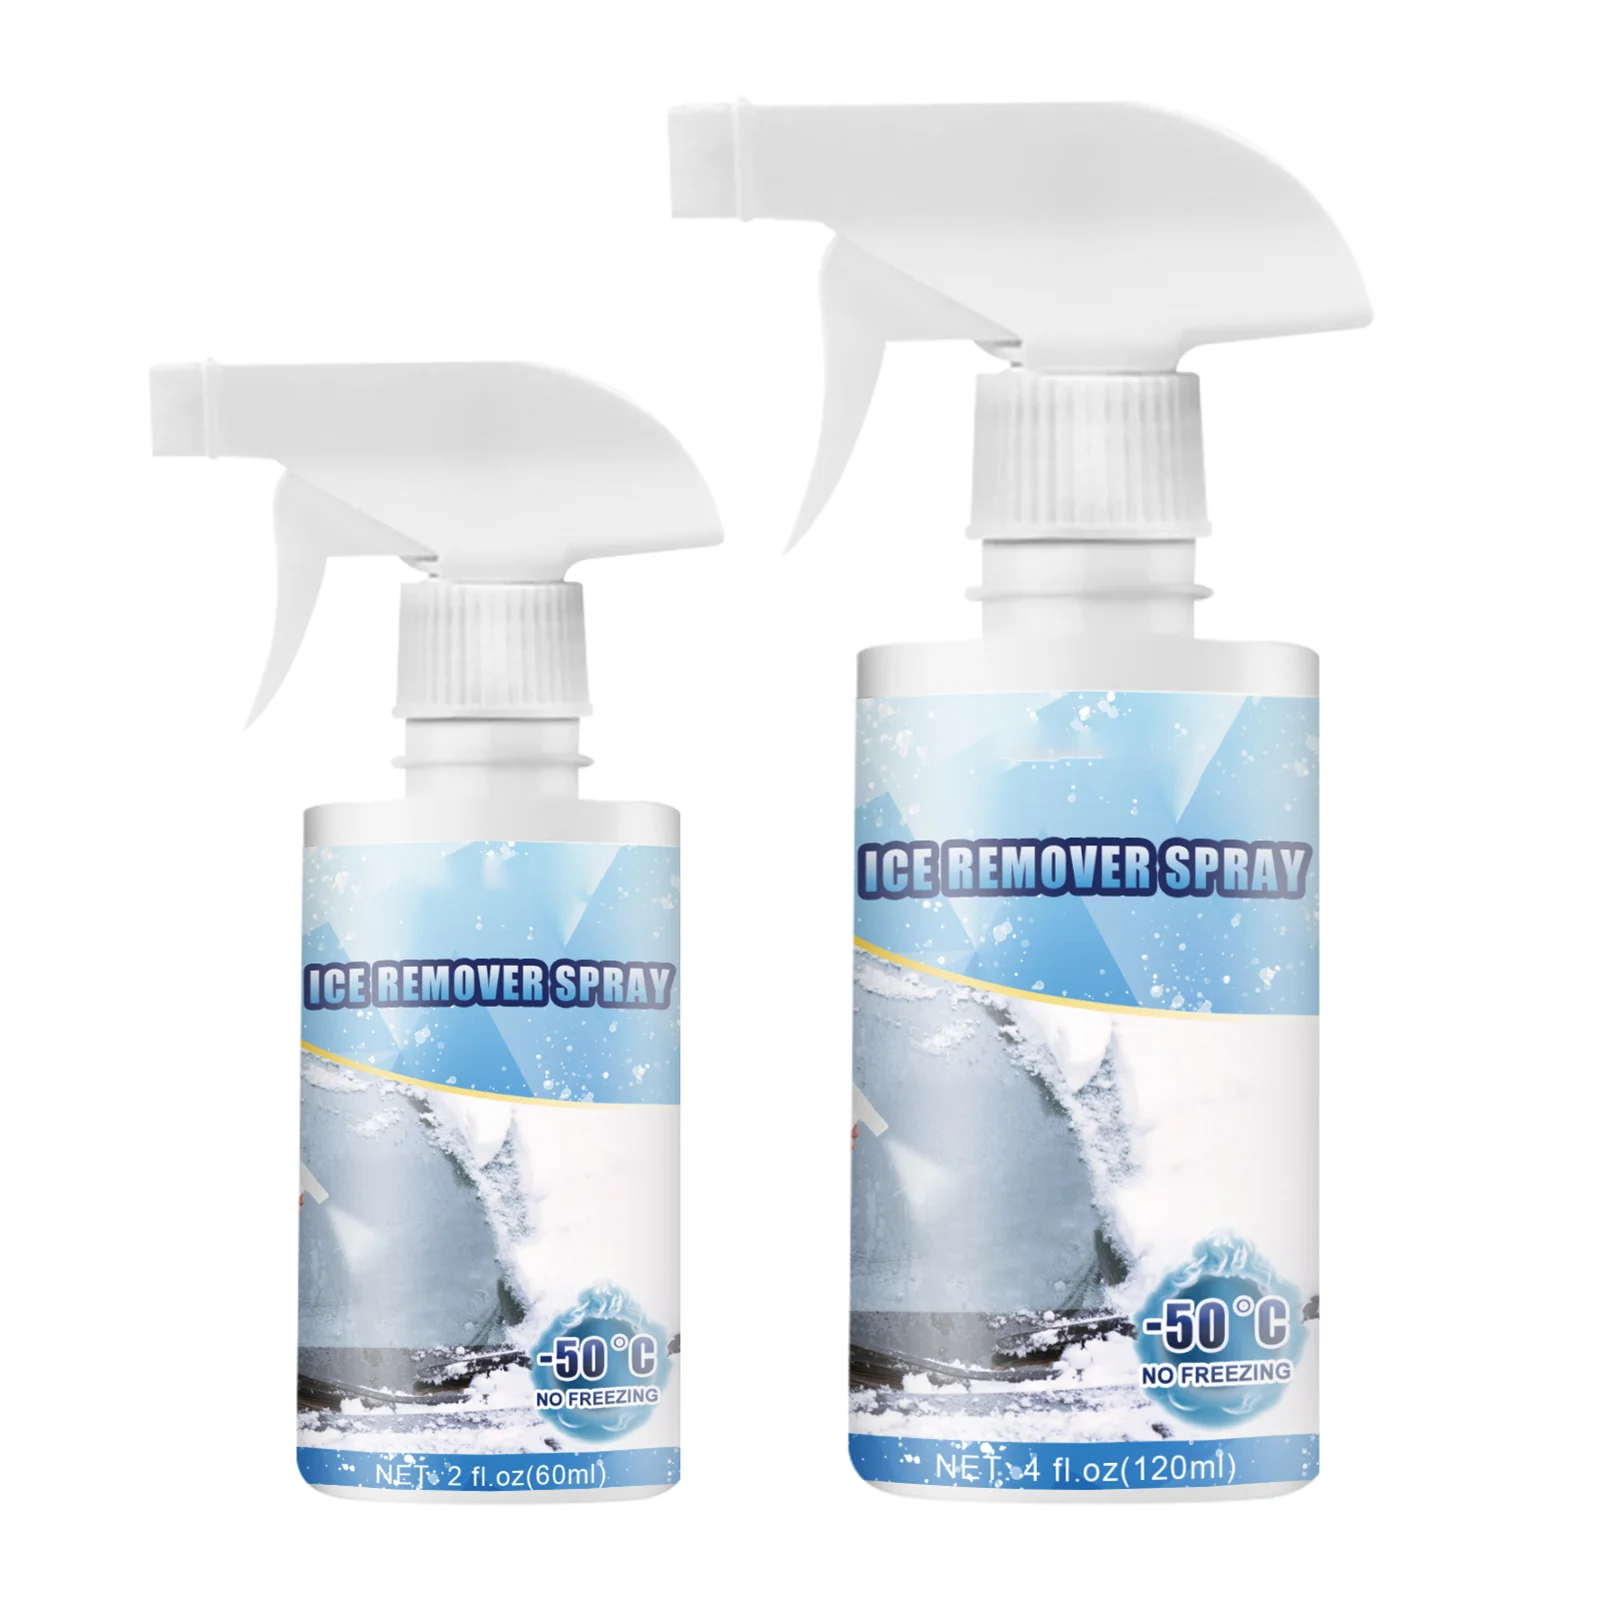 

60ml/120m De Icer Spray Fastacting Deicer Snow Melting Agent Portable And Easy To Use Operates At -50c And Prevents Re-Freezing